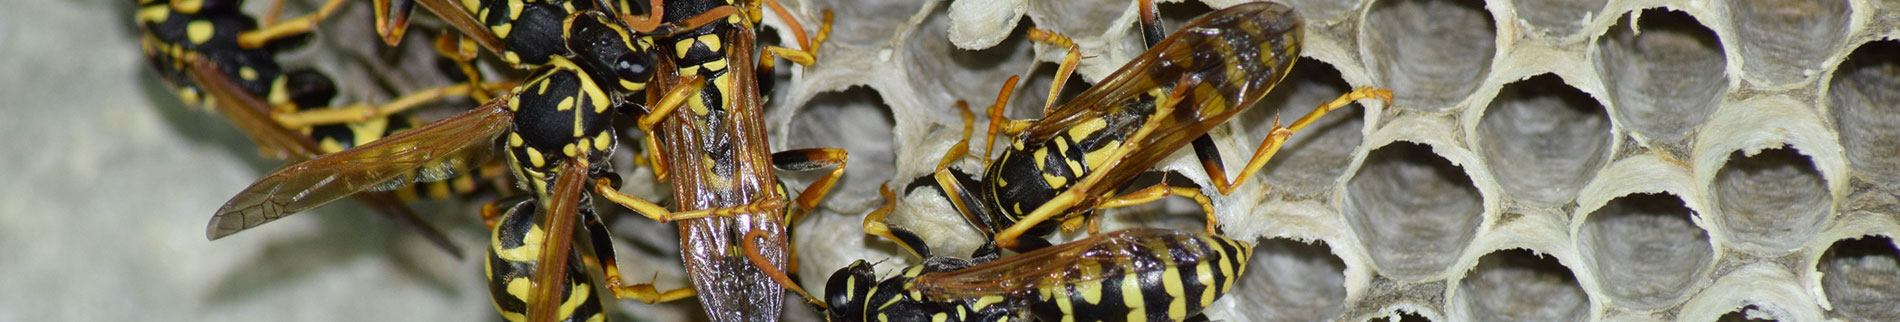 Wasps, Hornets & Bees Control Products